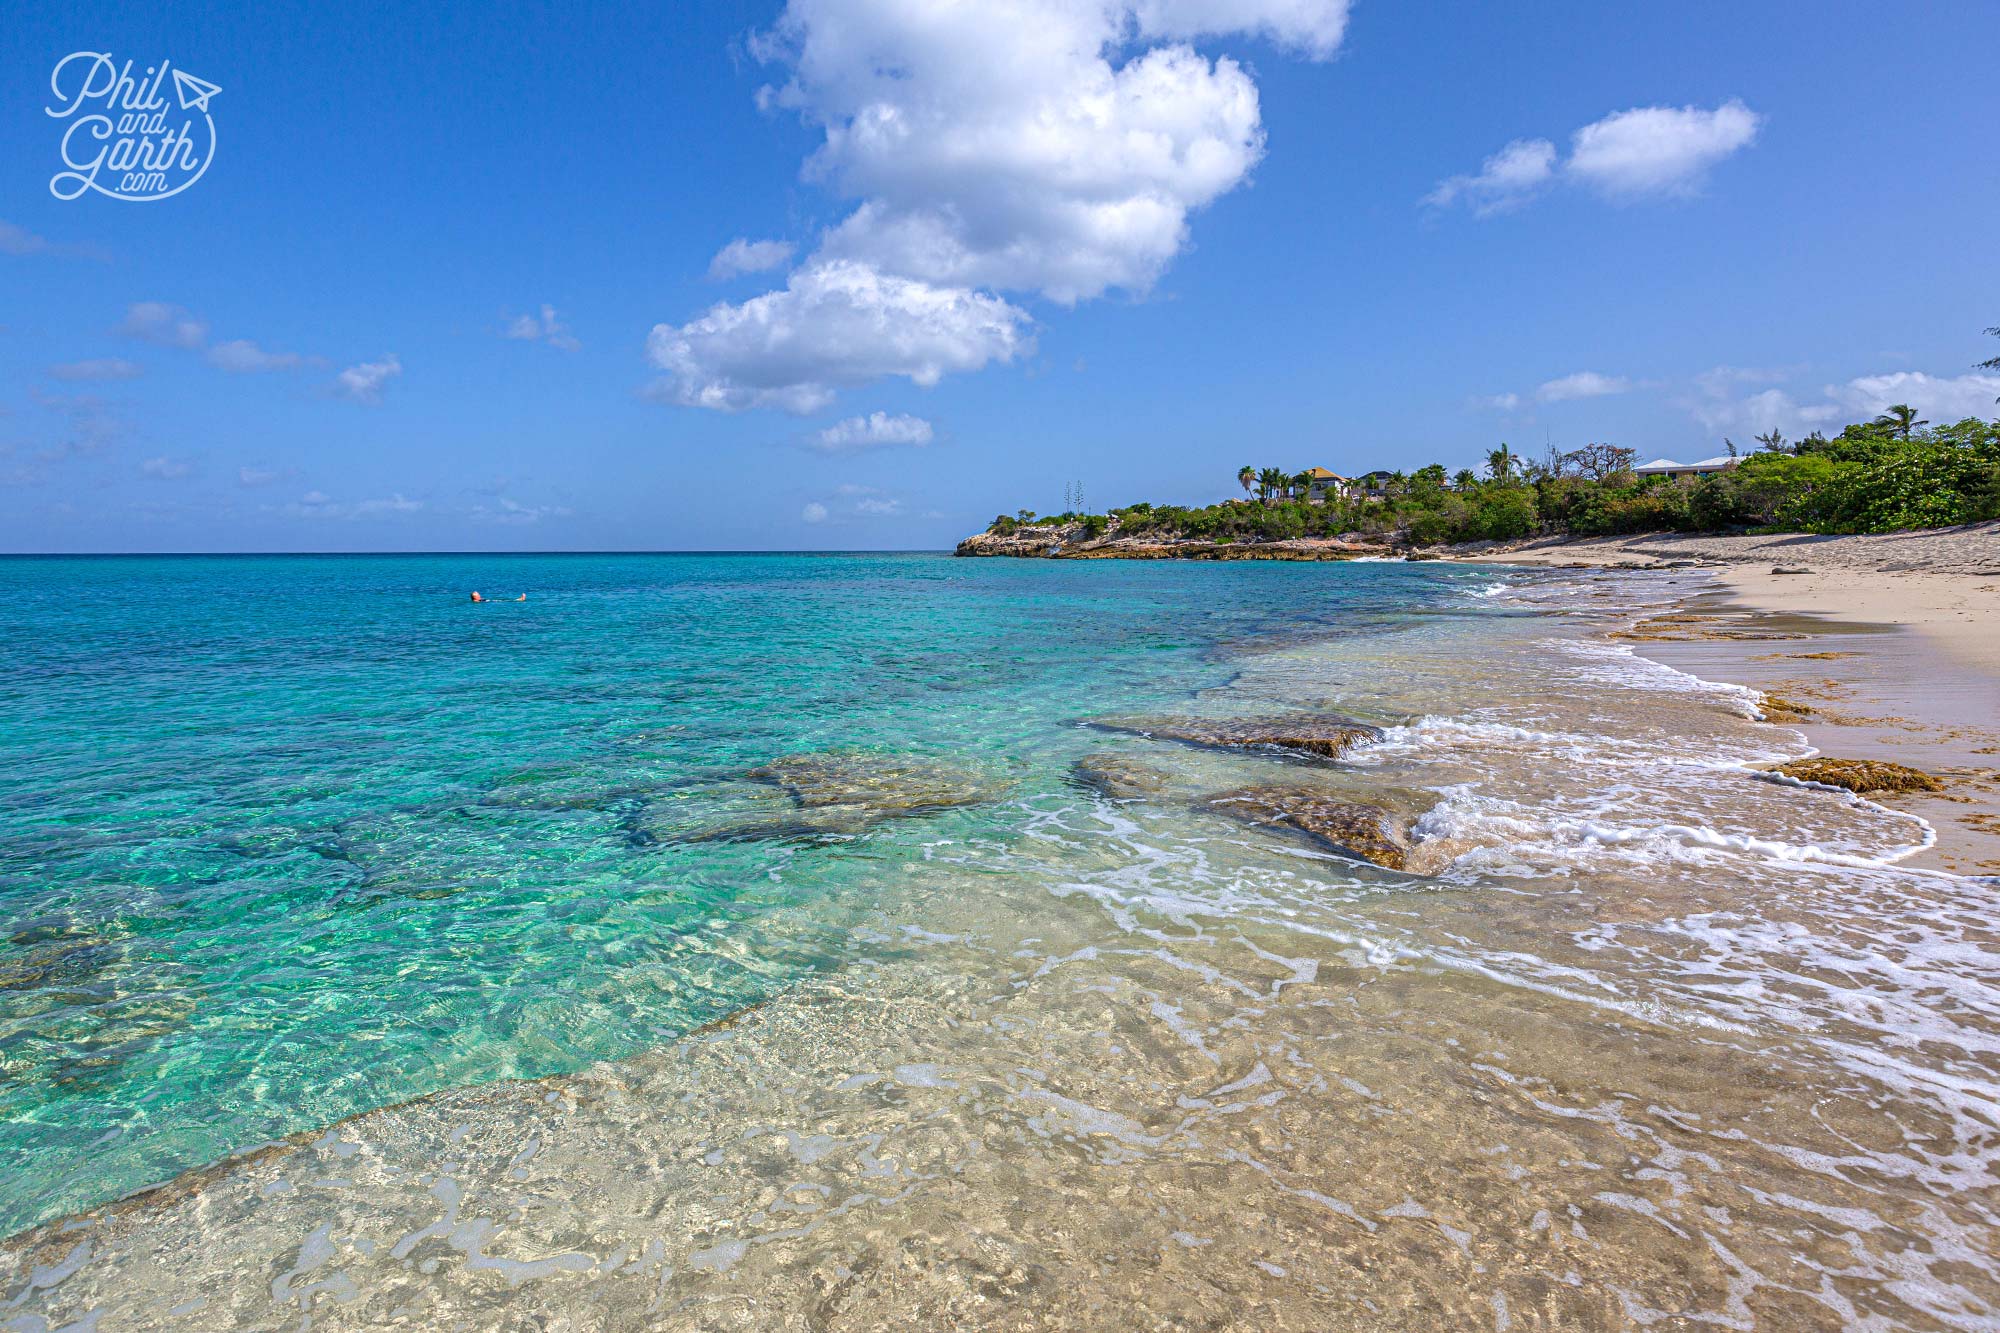 Plum Bay (Baie Aux Prunes) is a beautiful golden sandy beach on the French side of the island